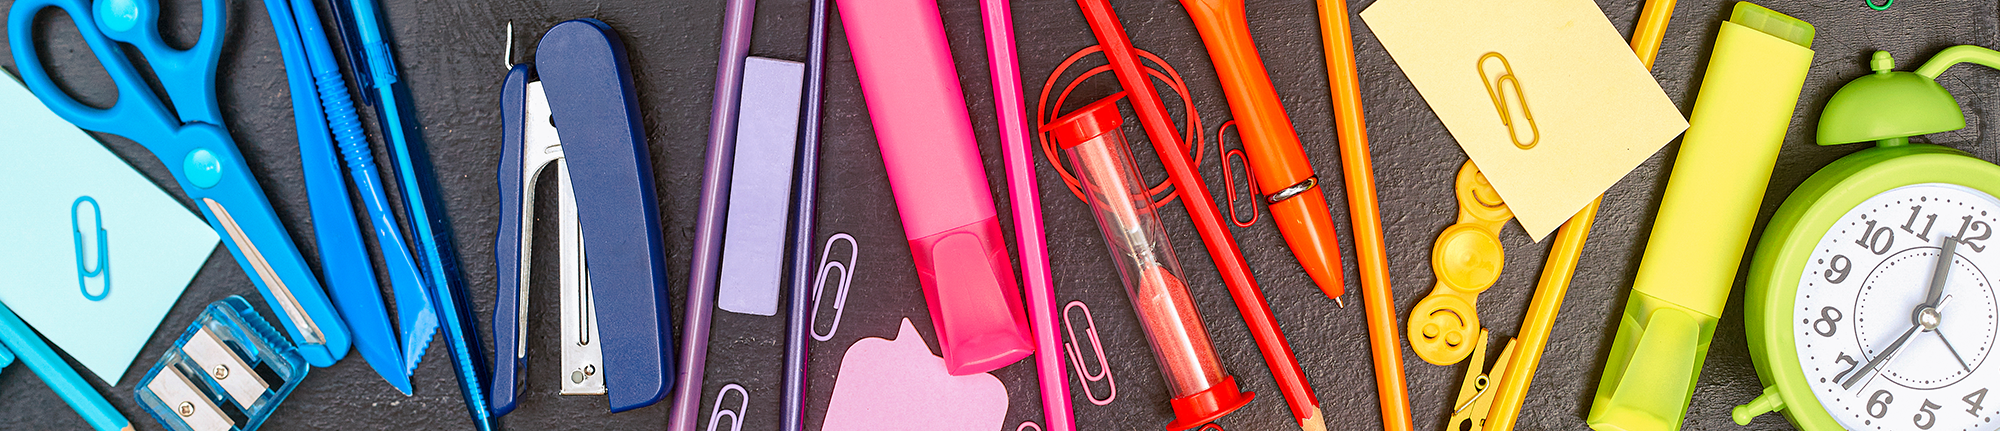 school supplies in rainbow colors on a desk